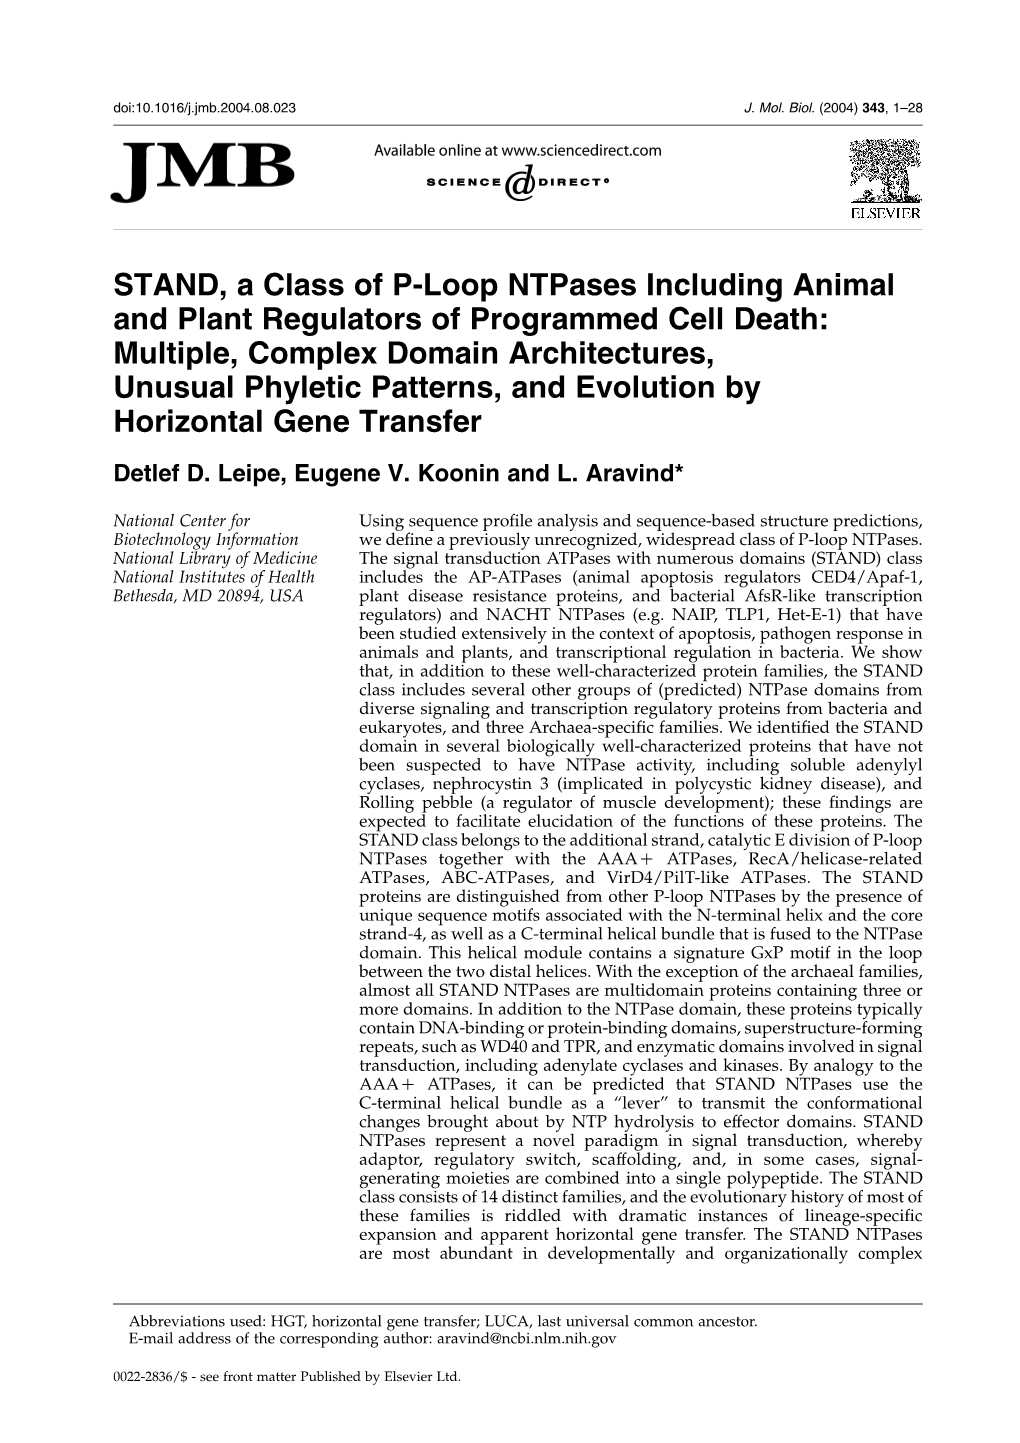 STAND, a Class of P-Loop Ntpases Including Animal and Plant